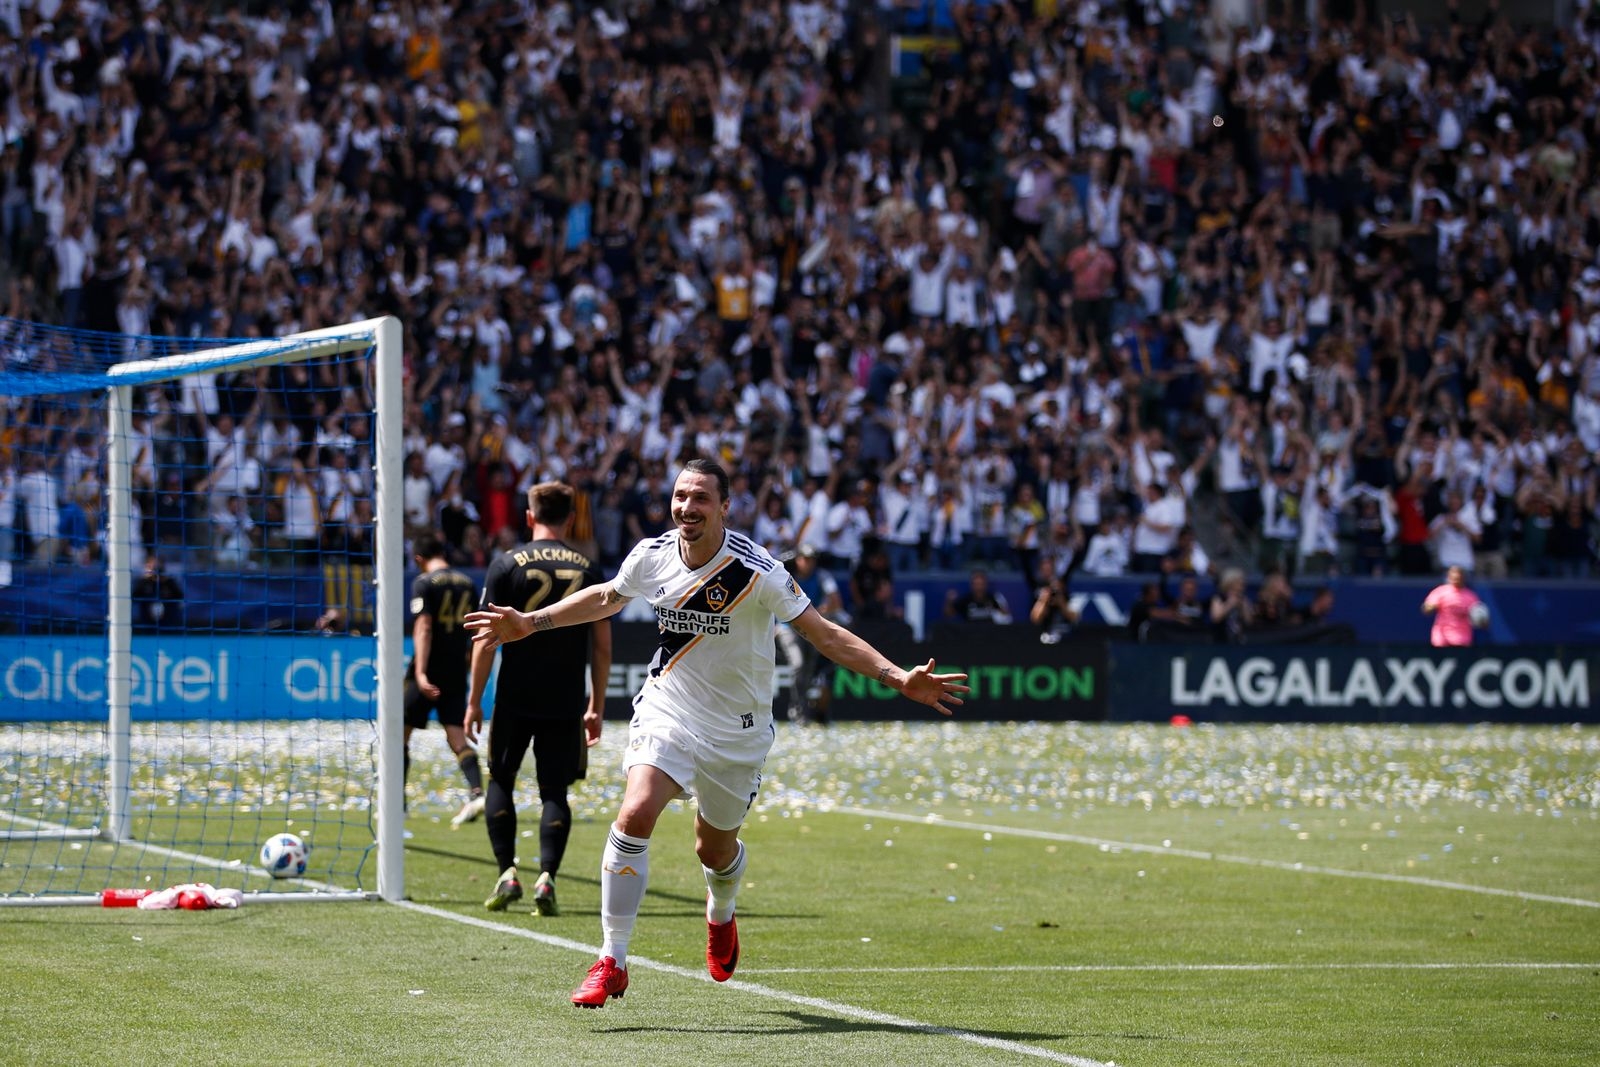 Los Angeles Galaxy's Zlatan Ibrahimovic, of Sweden, celebrates his second goal of the game during the second half of an MLS soccer match against the Los Angeles FC Saturday, March 31, 2018, in Carson, Calif. The Galaxy won 4-3. (AP Photo/Jae C. Hong)